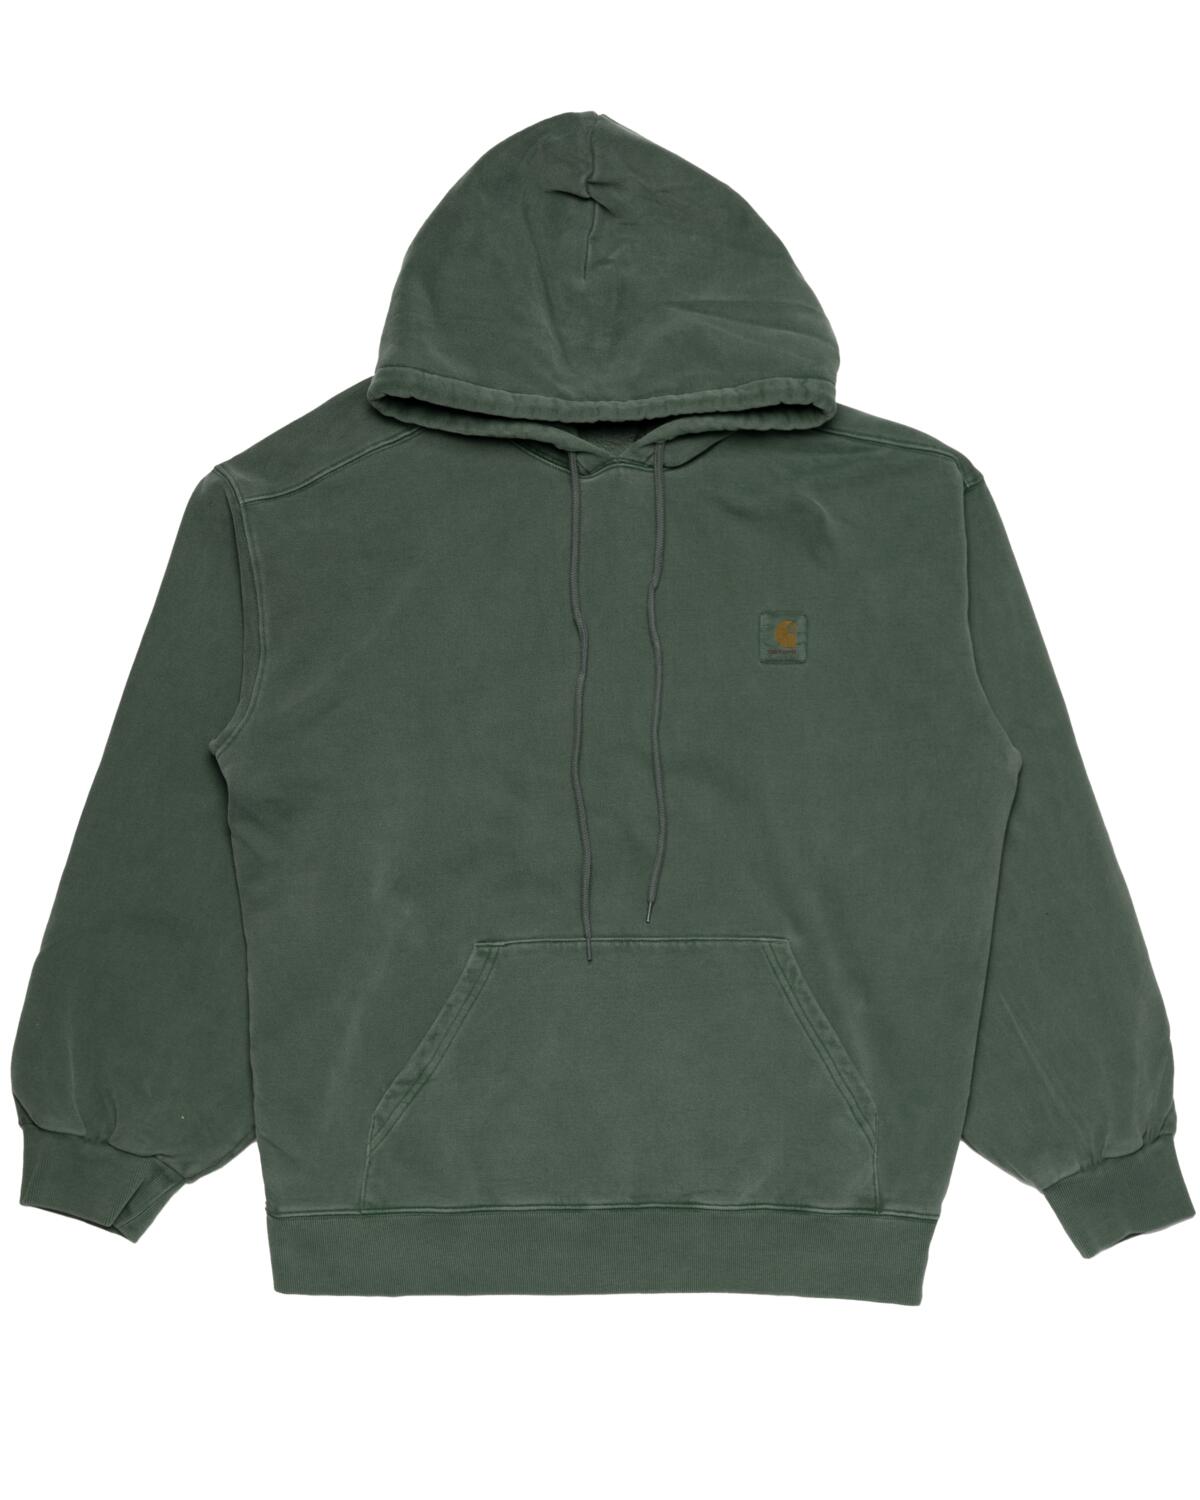 Carhartt WIP Hooded Vista Sweat | I029523.0WH.GD | AFEW STORE